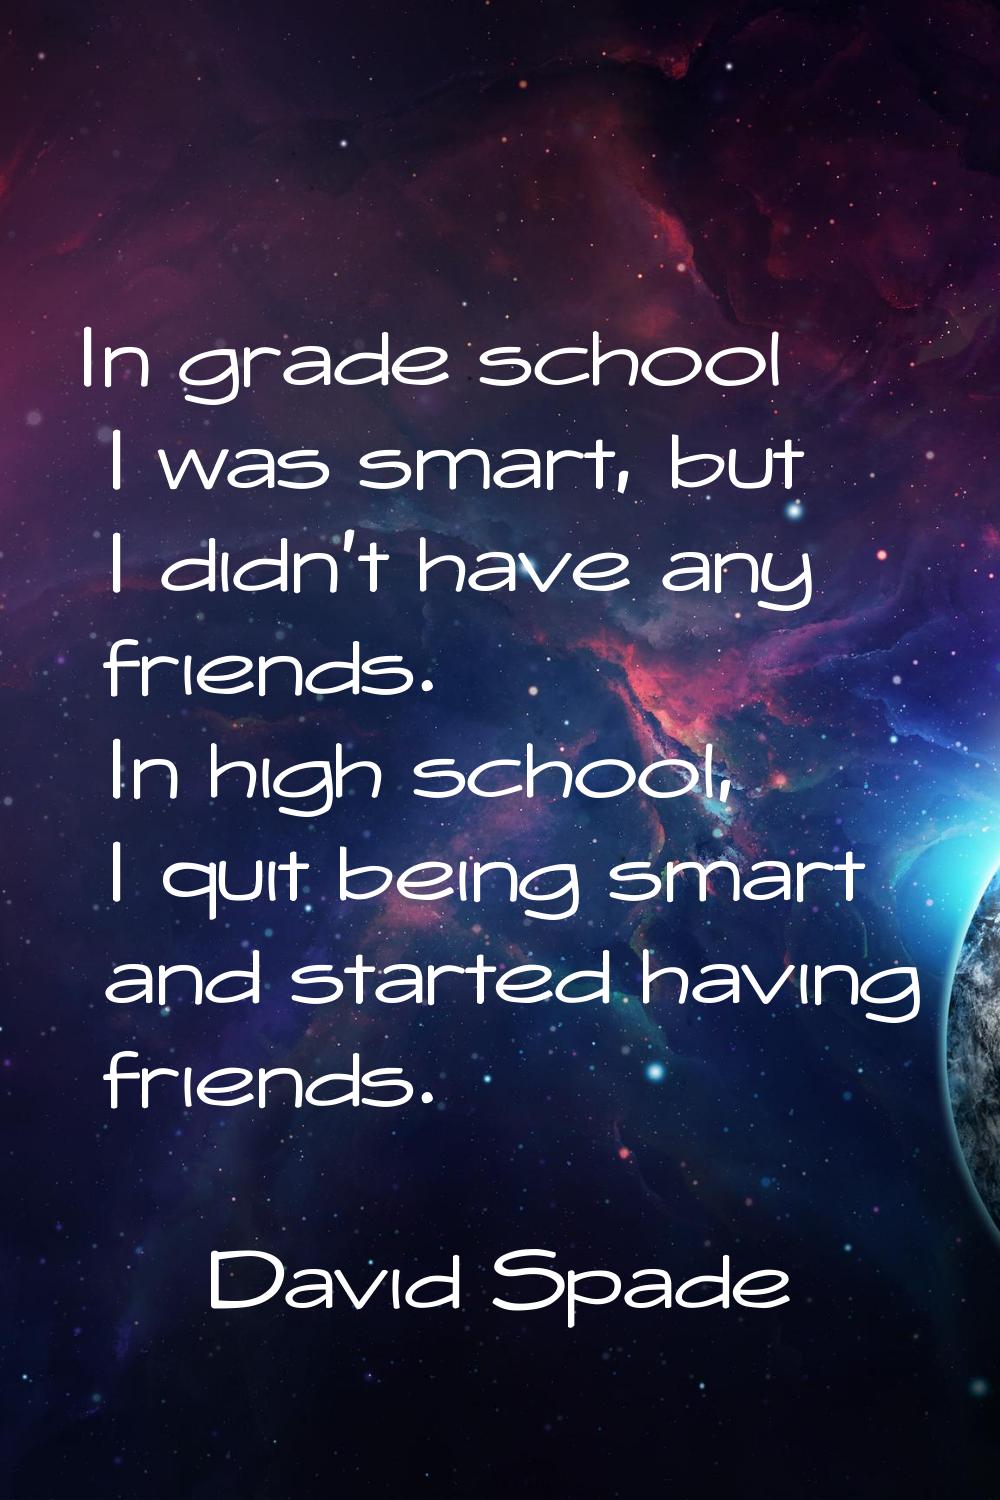 In grade school I was smart, but I didn't have any friends. In high school, I quit being smart and 